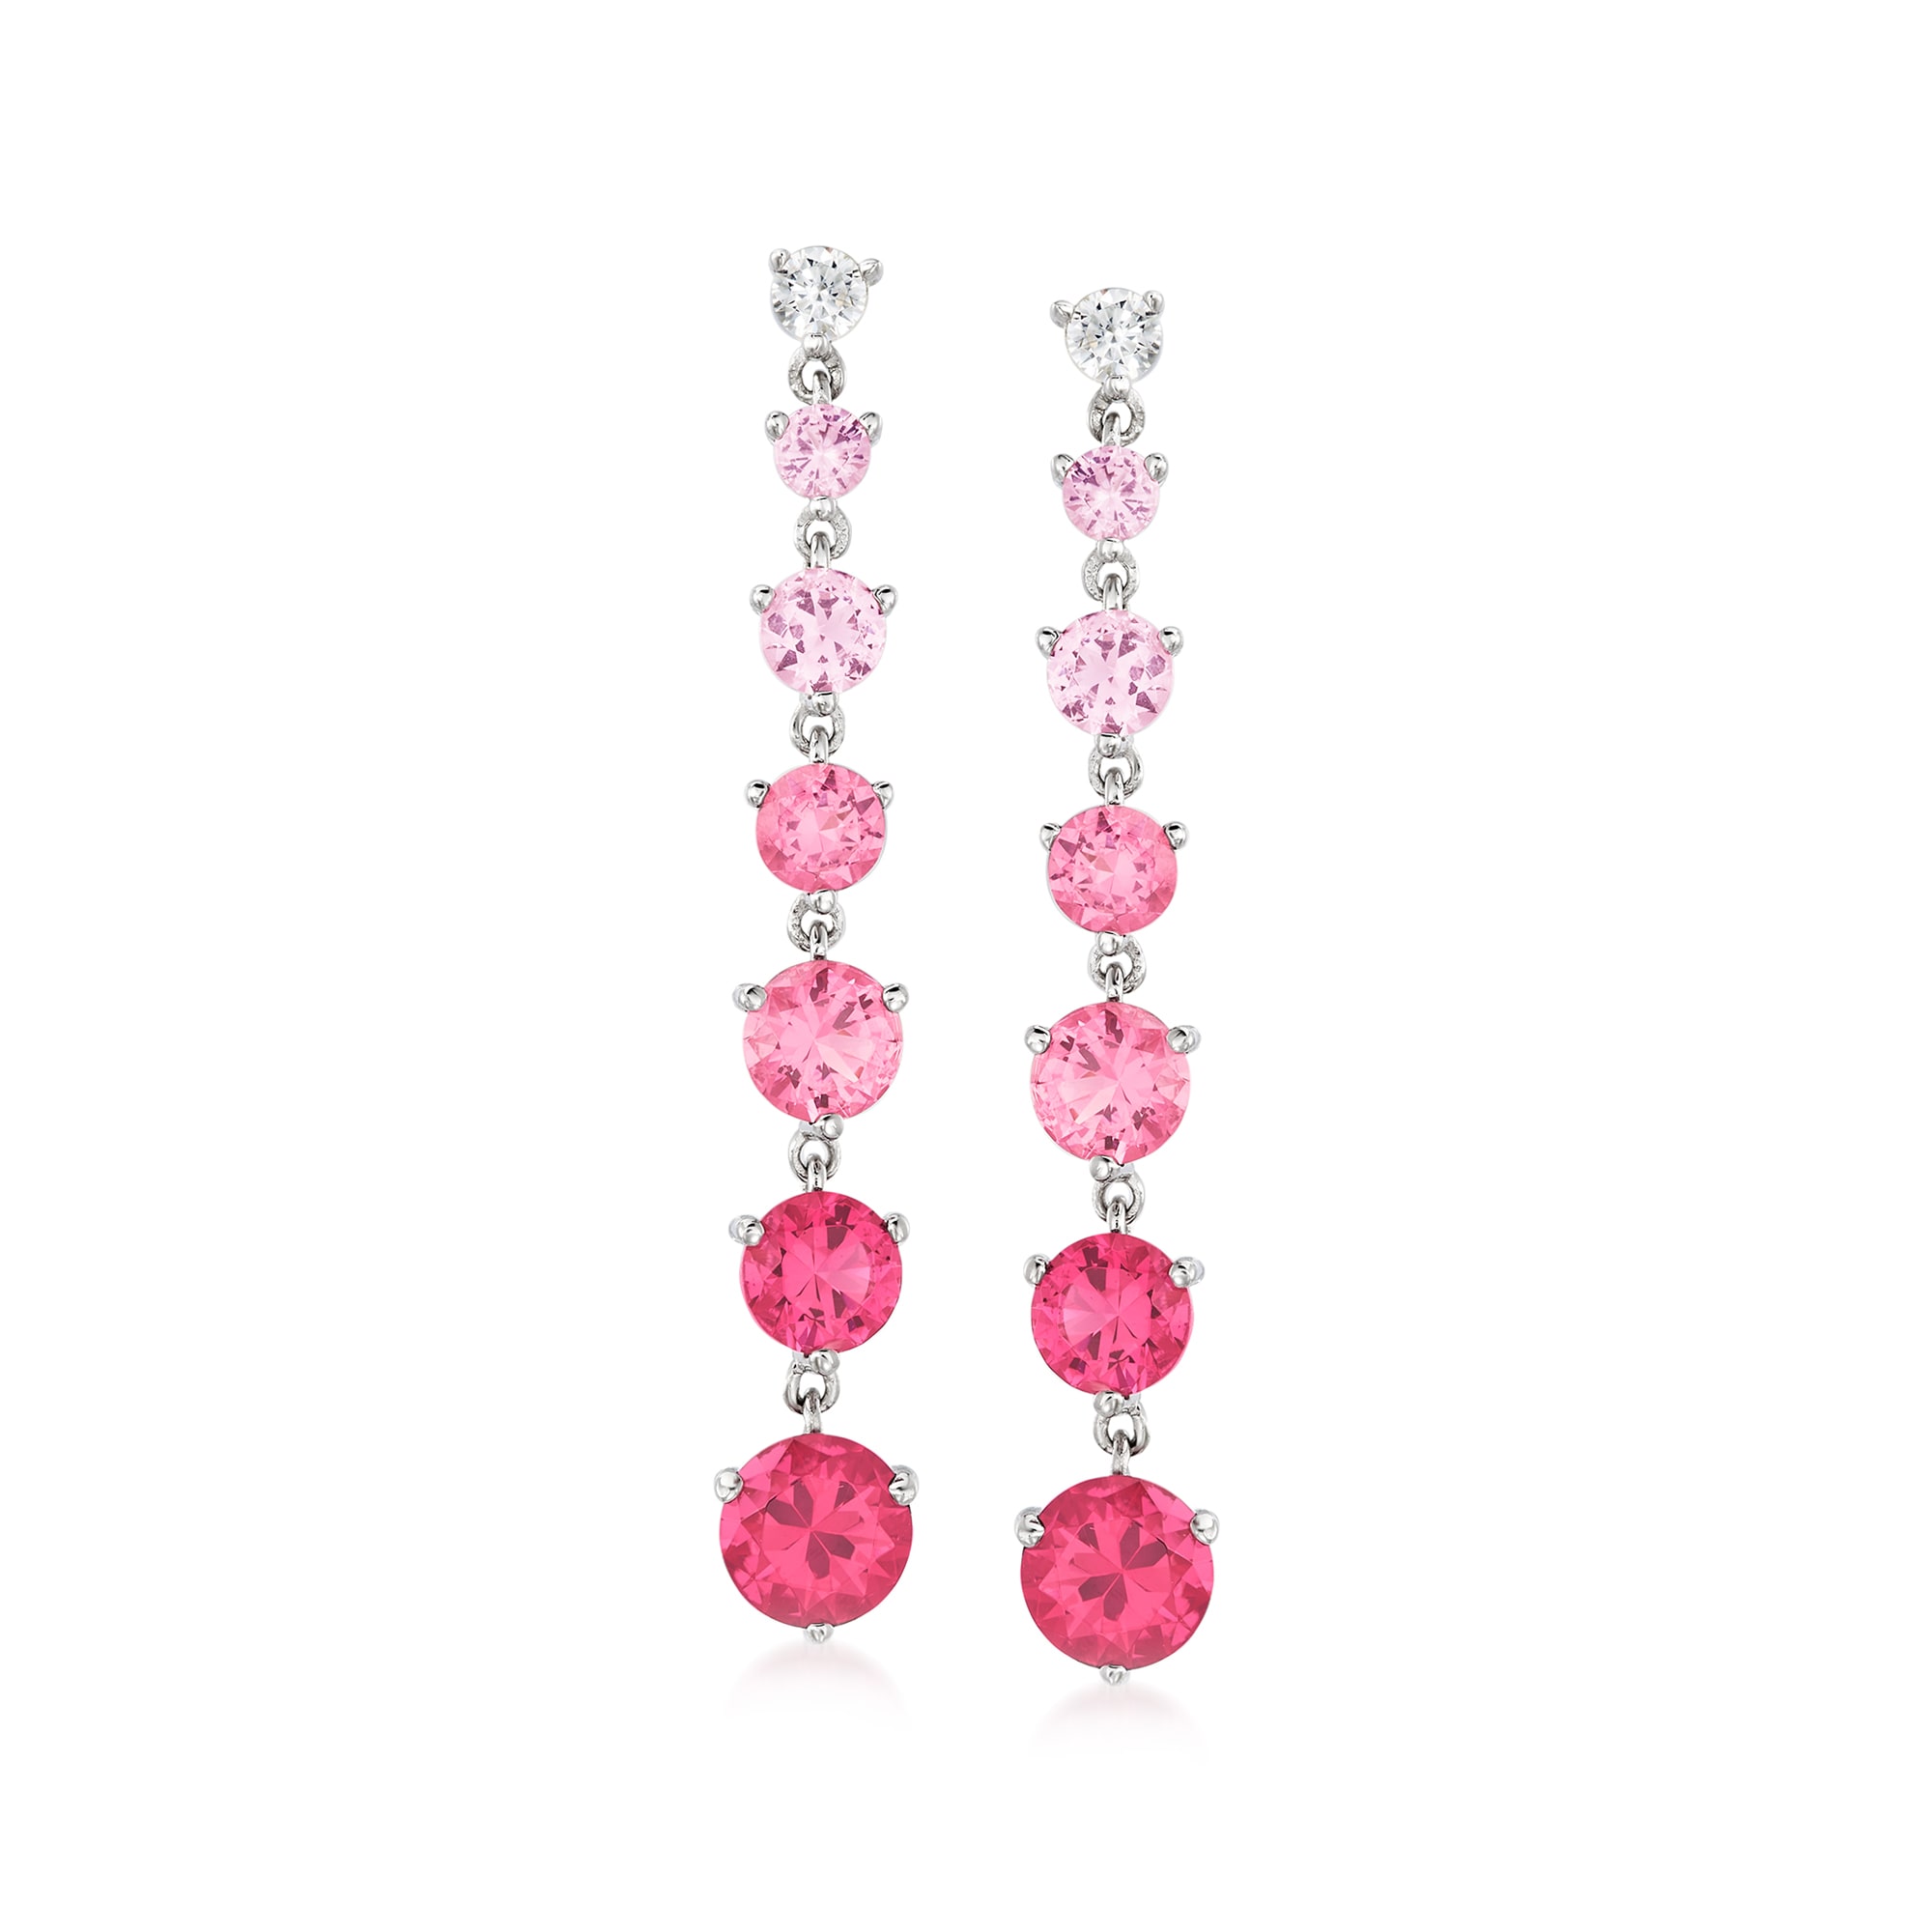 4.50 ct. t.w. Simulated Pink Sapphire and .20 ct. t.w. CZ Drop Earrings in  Sterling Silver